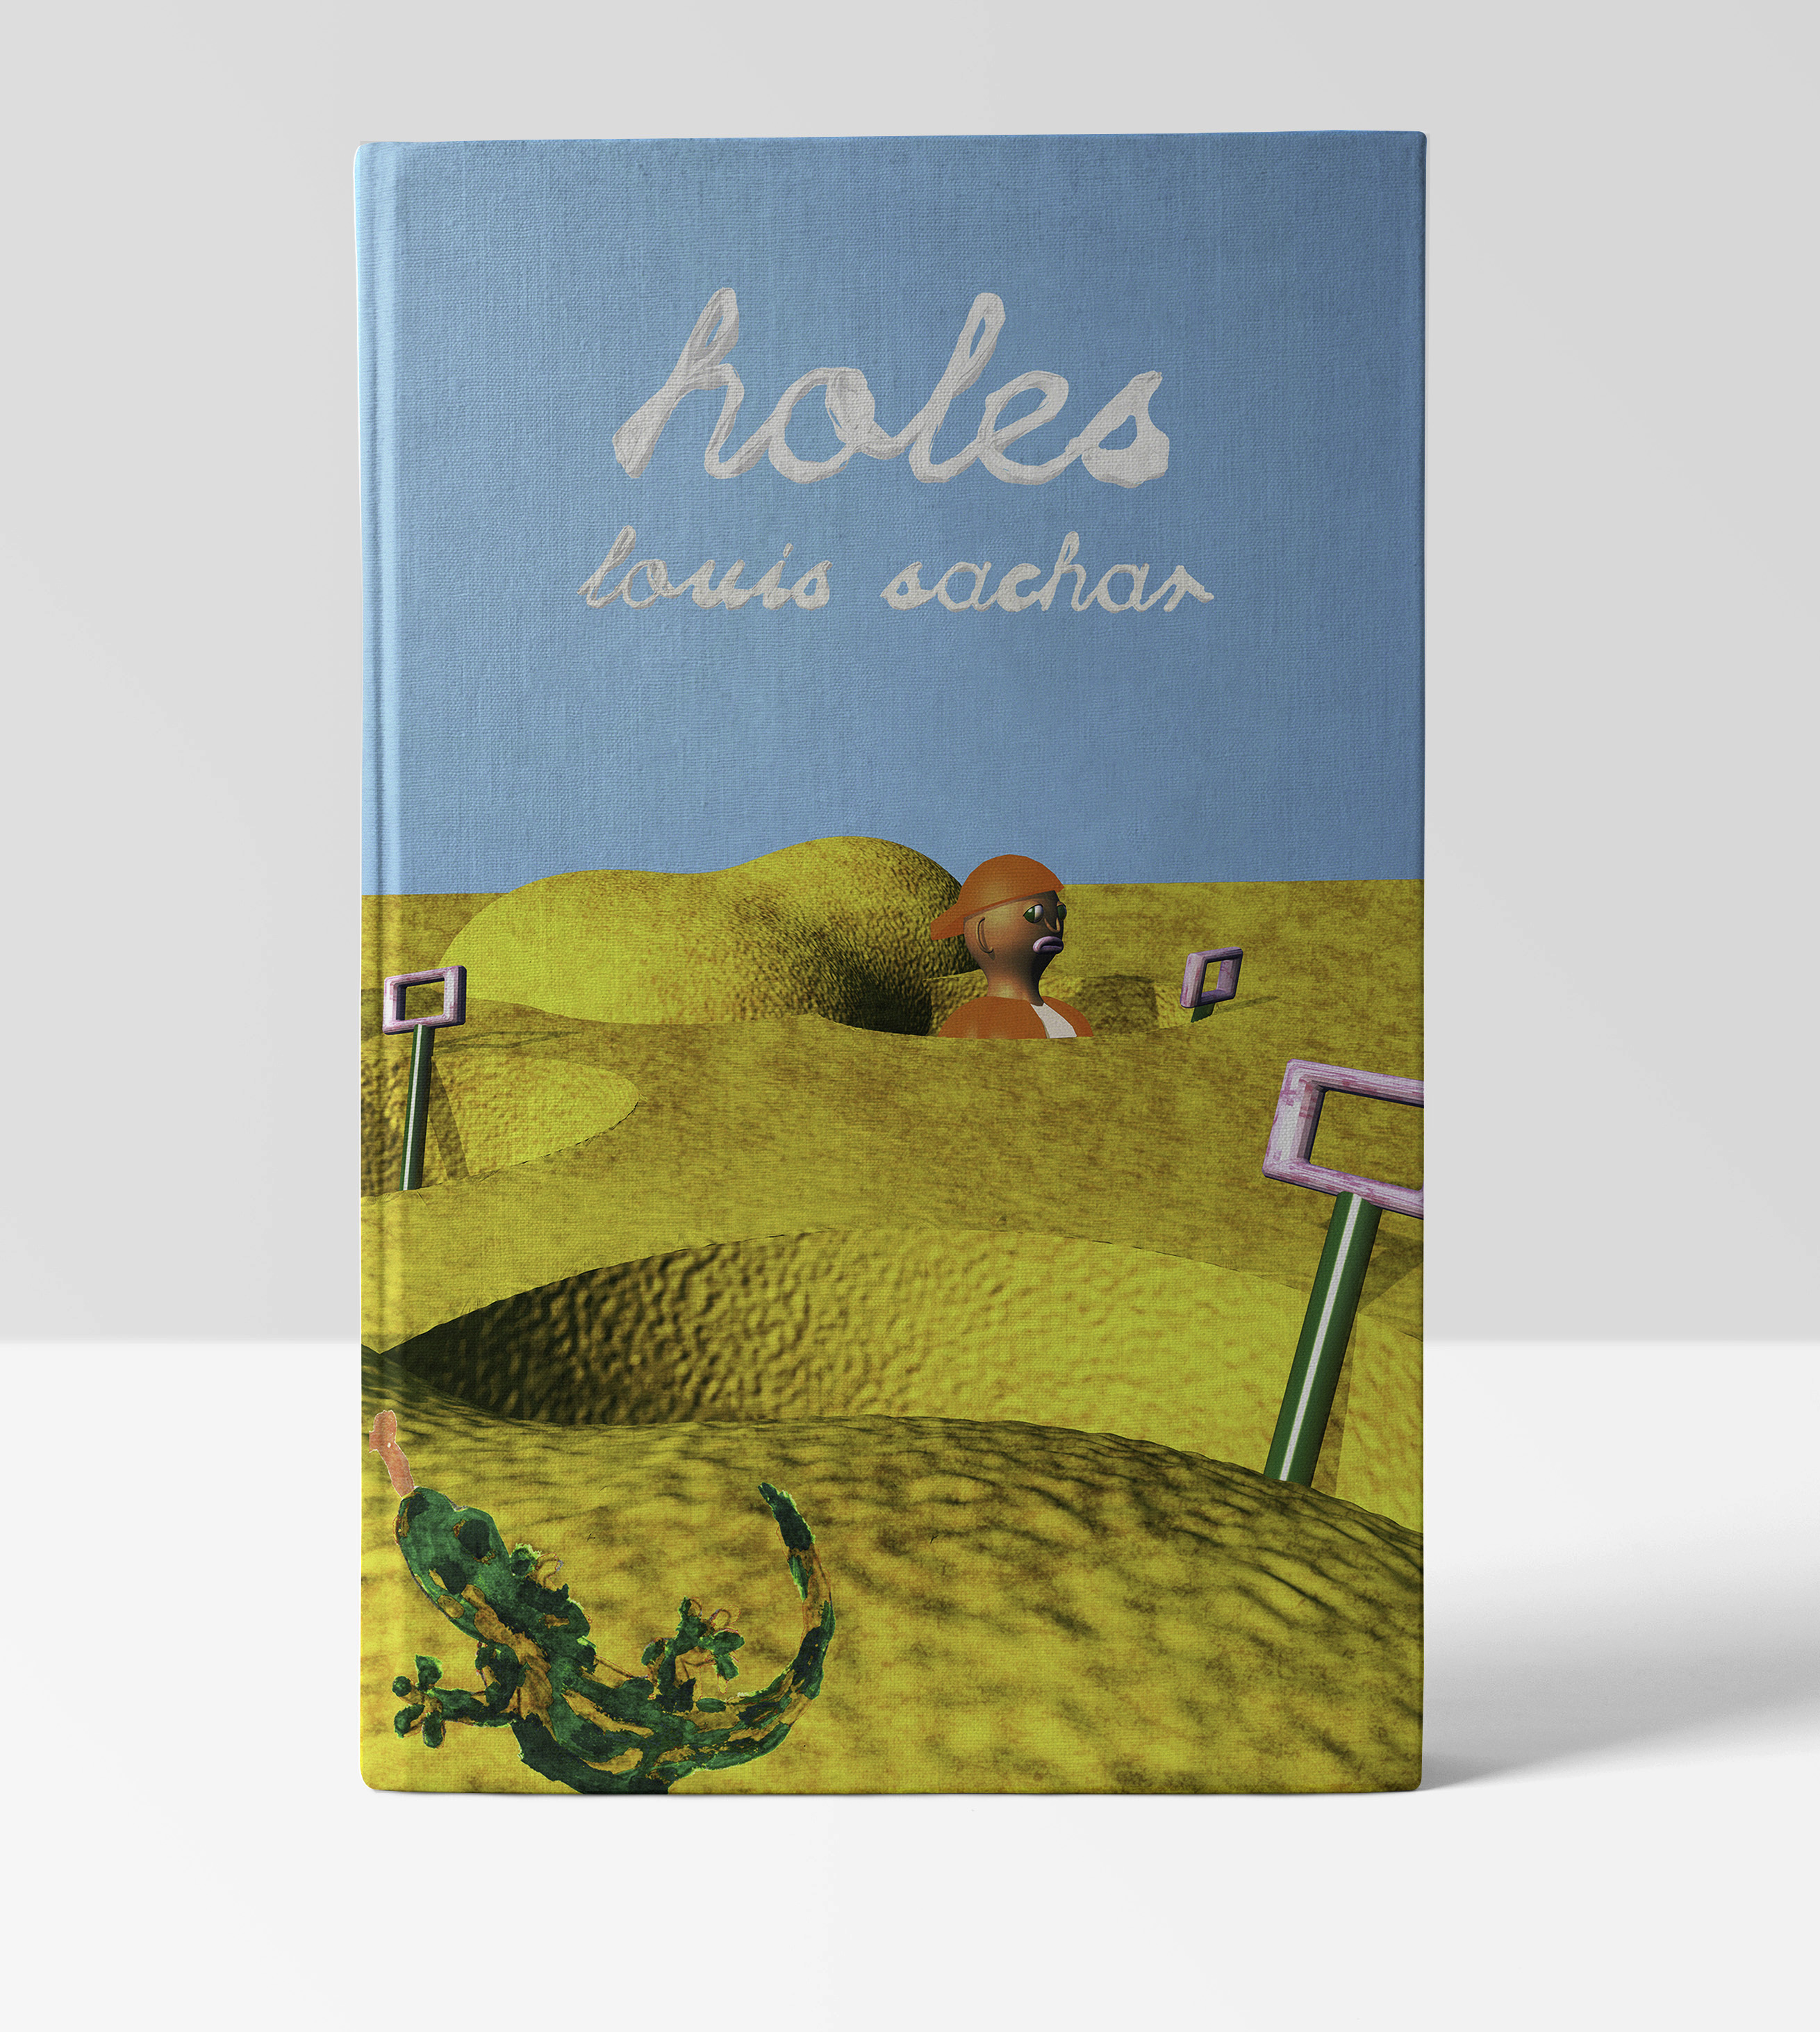 Holes Author: Louis Sachar About the author: Louis Sachar is the